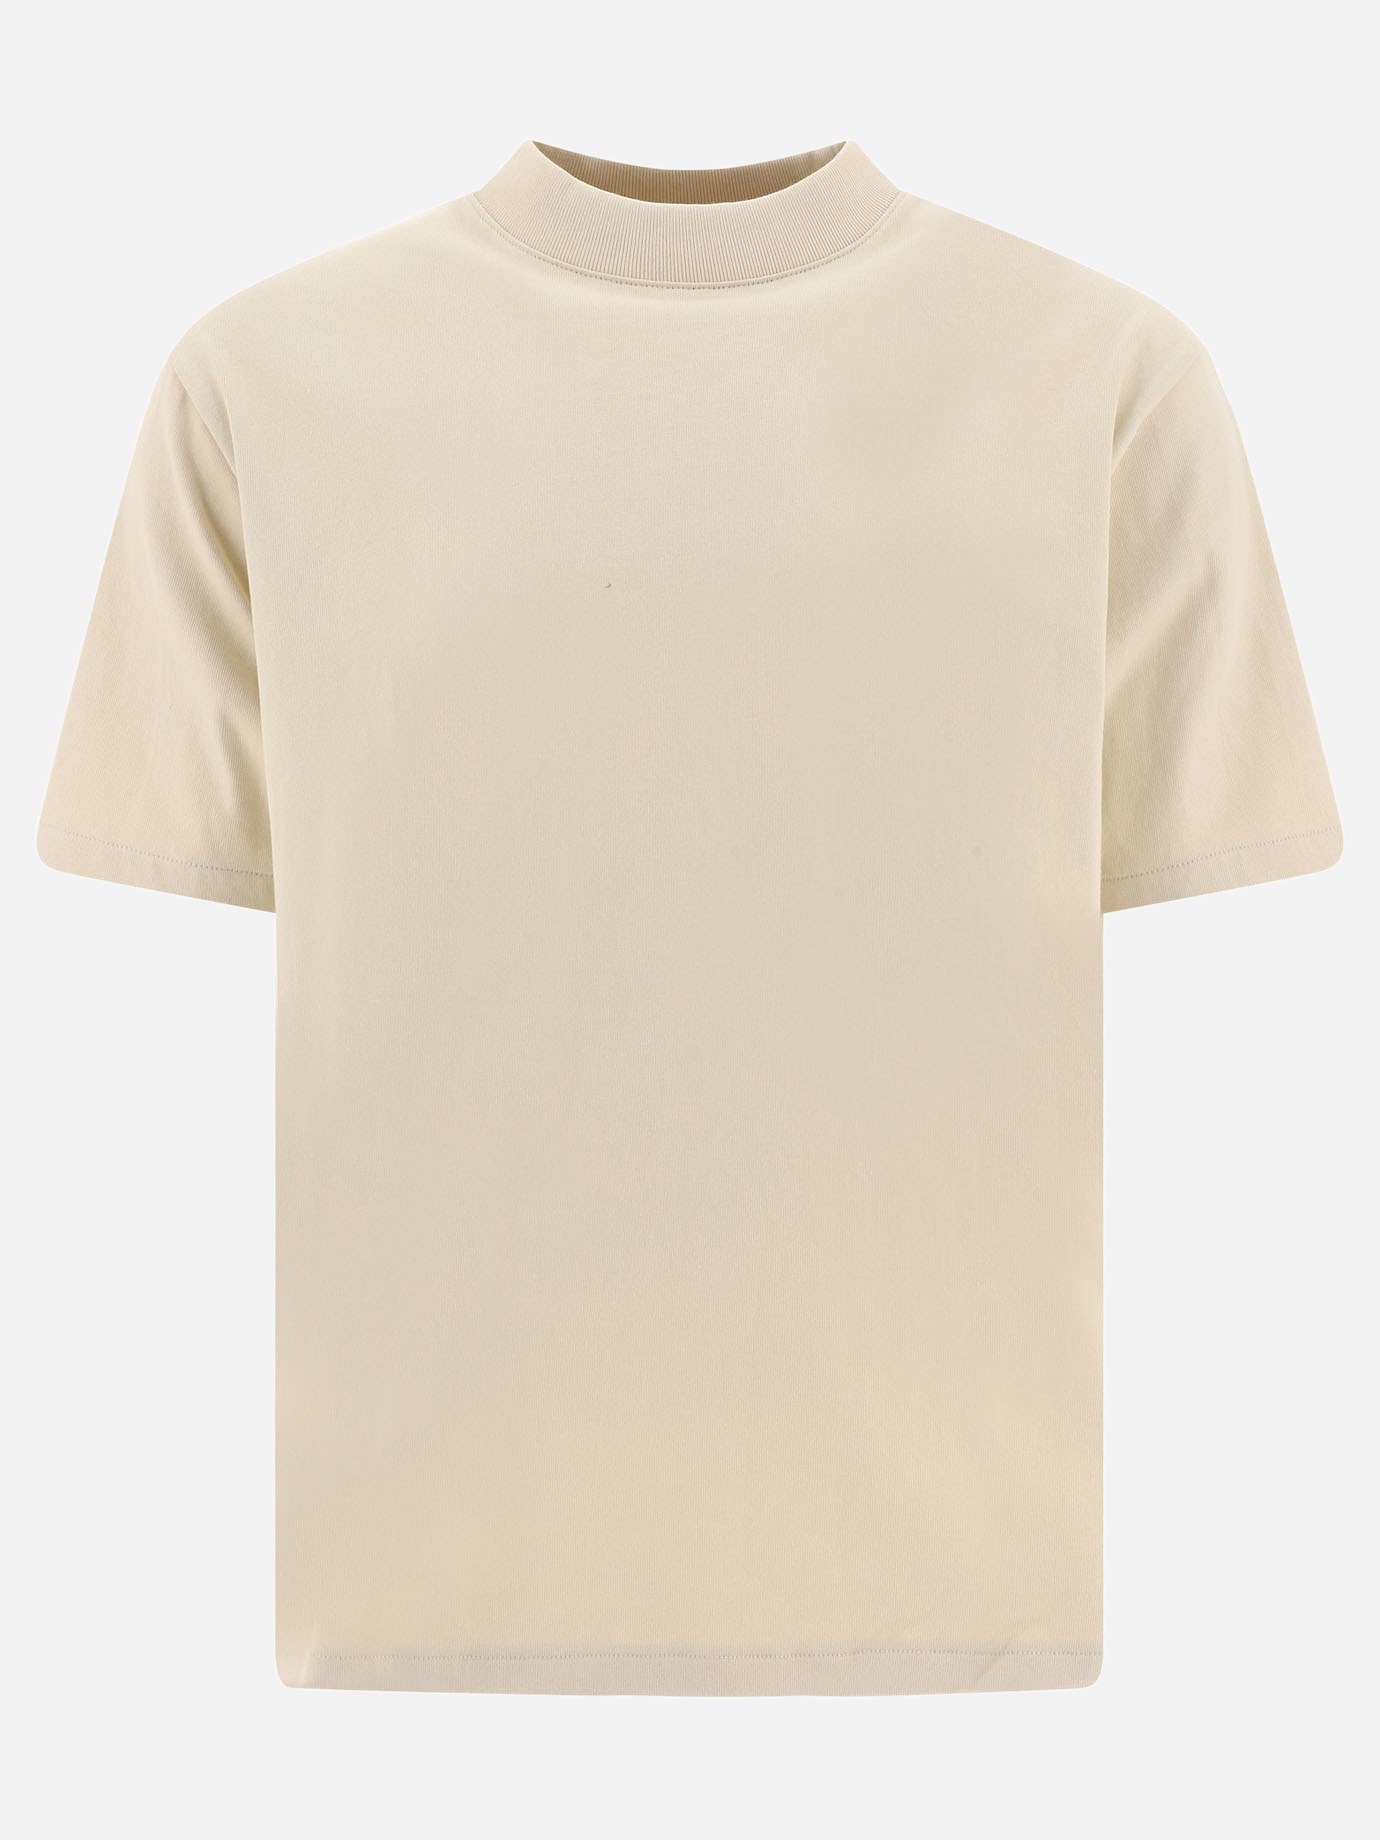  Mezzo Collo  t-shirtby Levi's Made & Crafted - 3